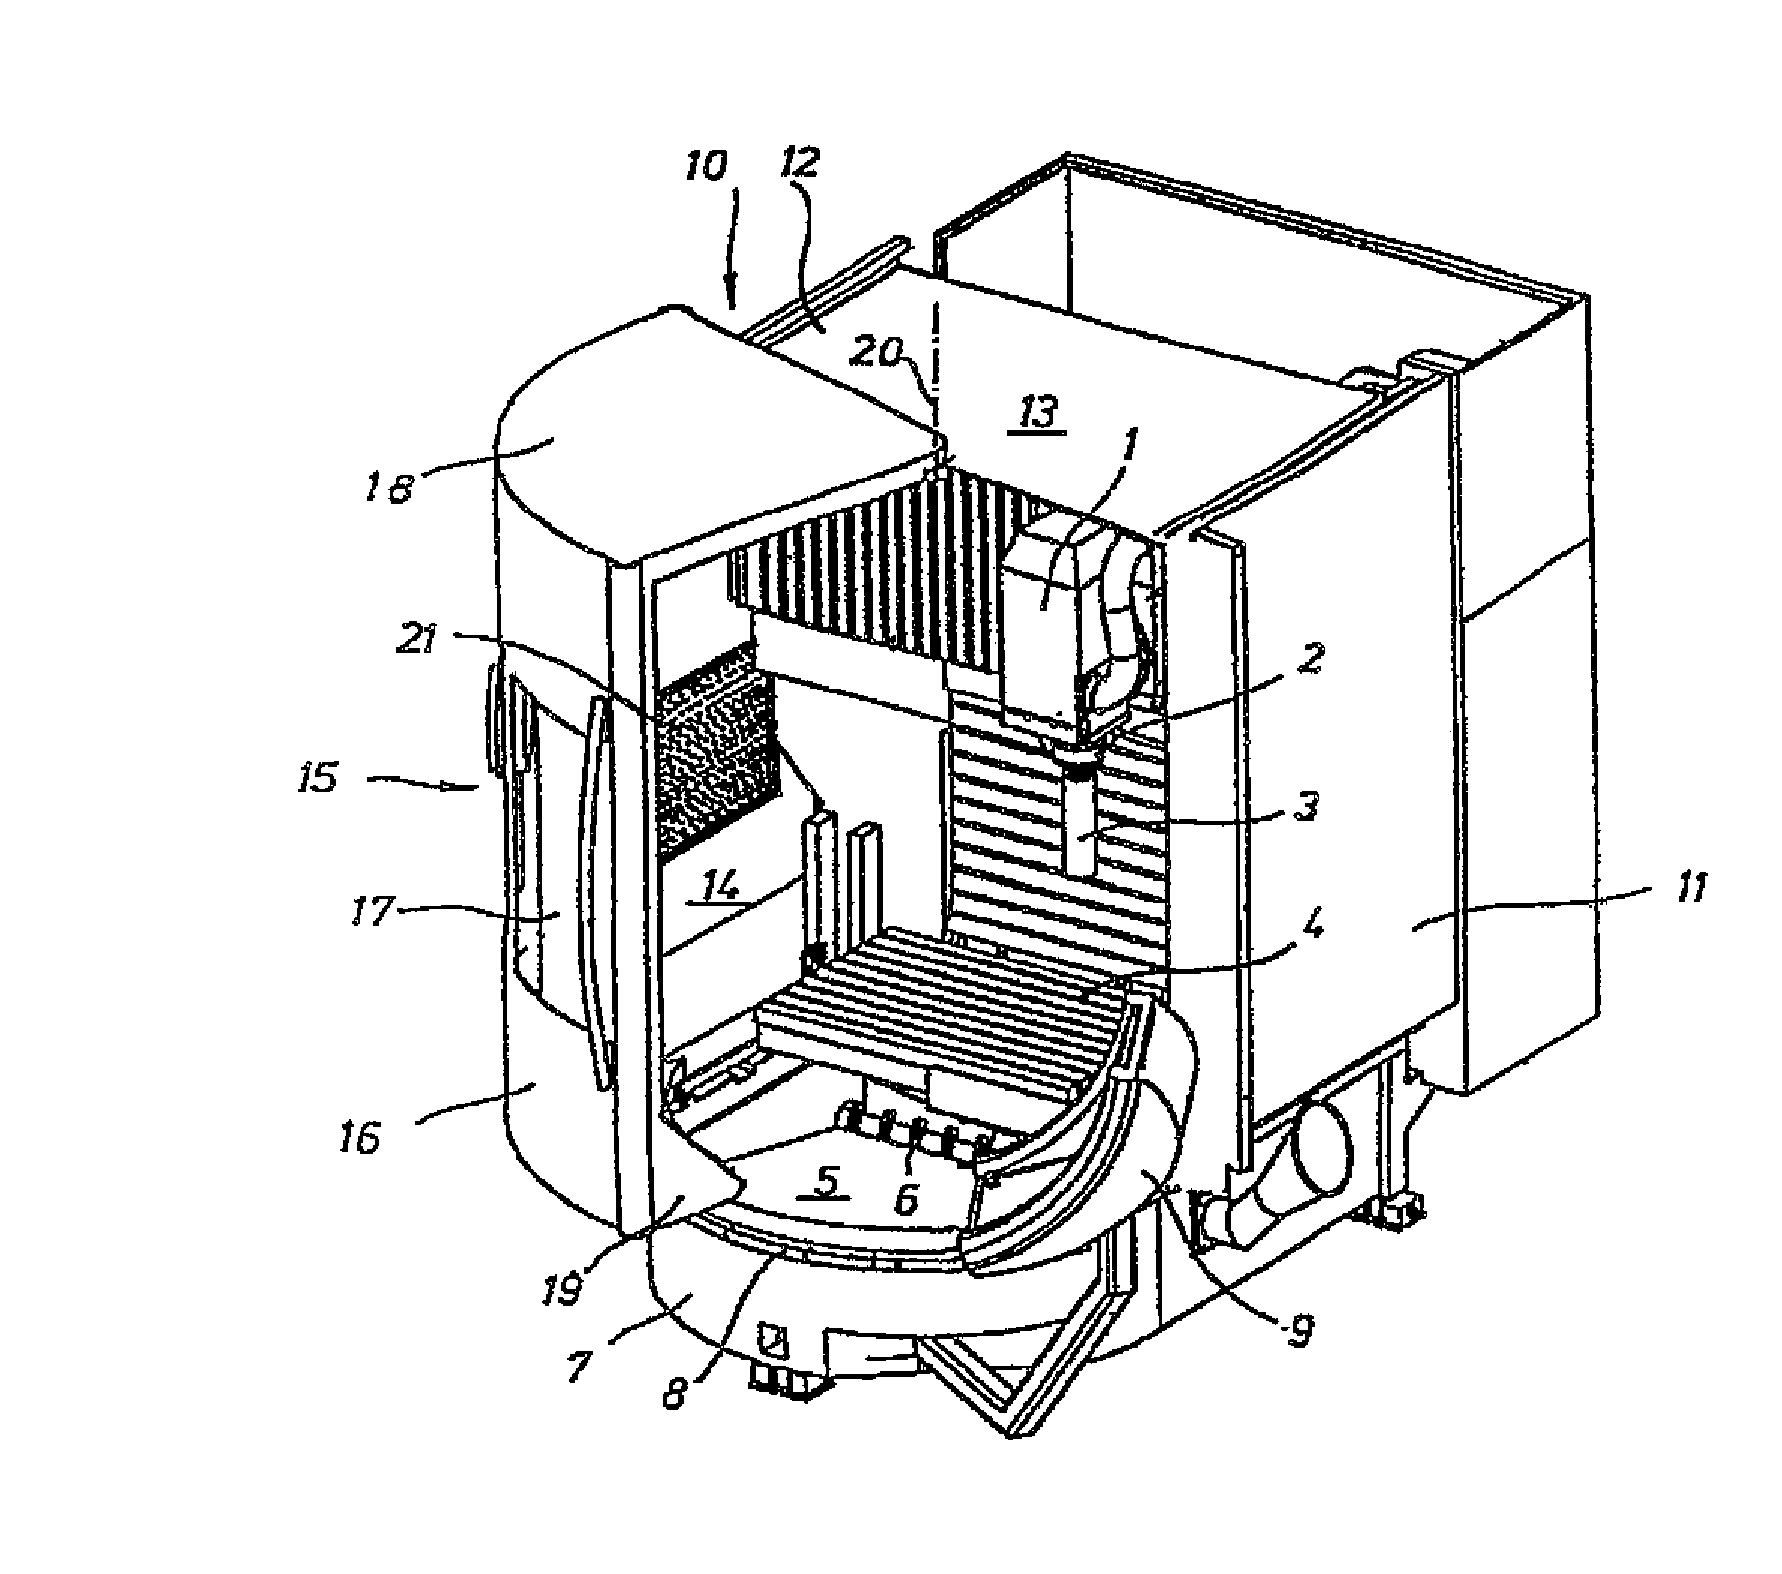 Machine tool comprising a protective cabinet and an illumination system